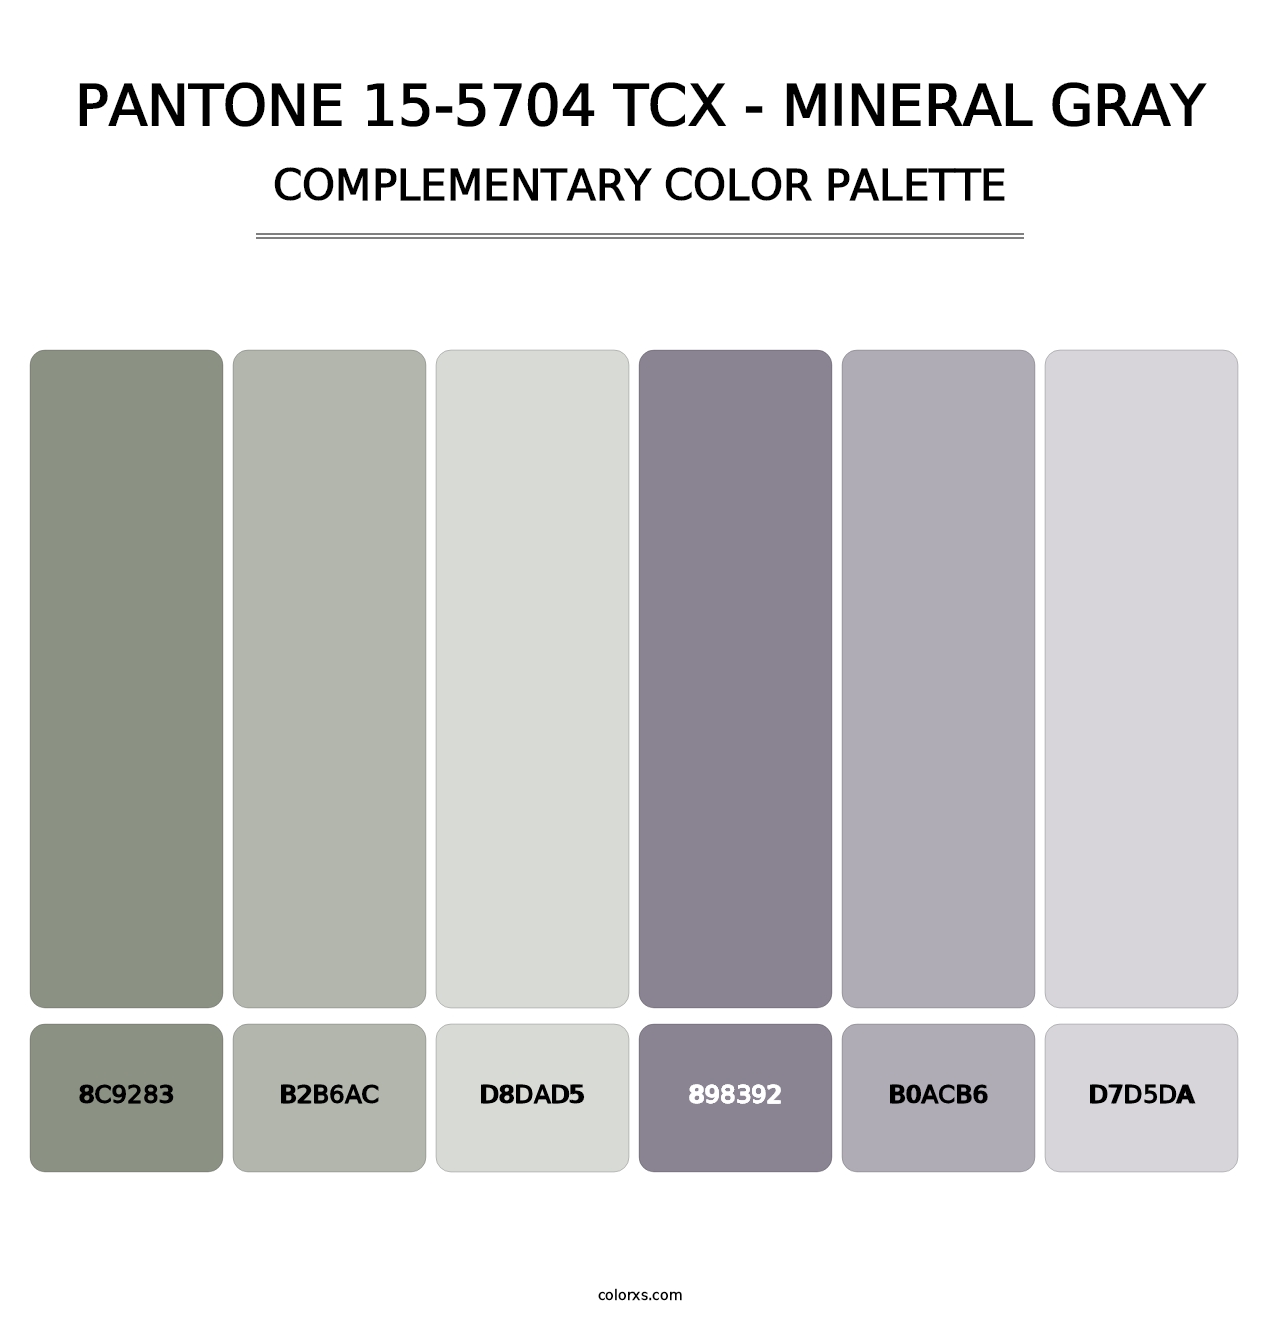 PANTONE 15-5704 TCX - Mineral Gray - Complementary Color Palette